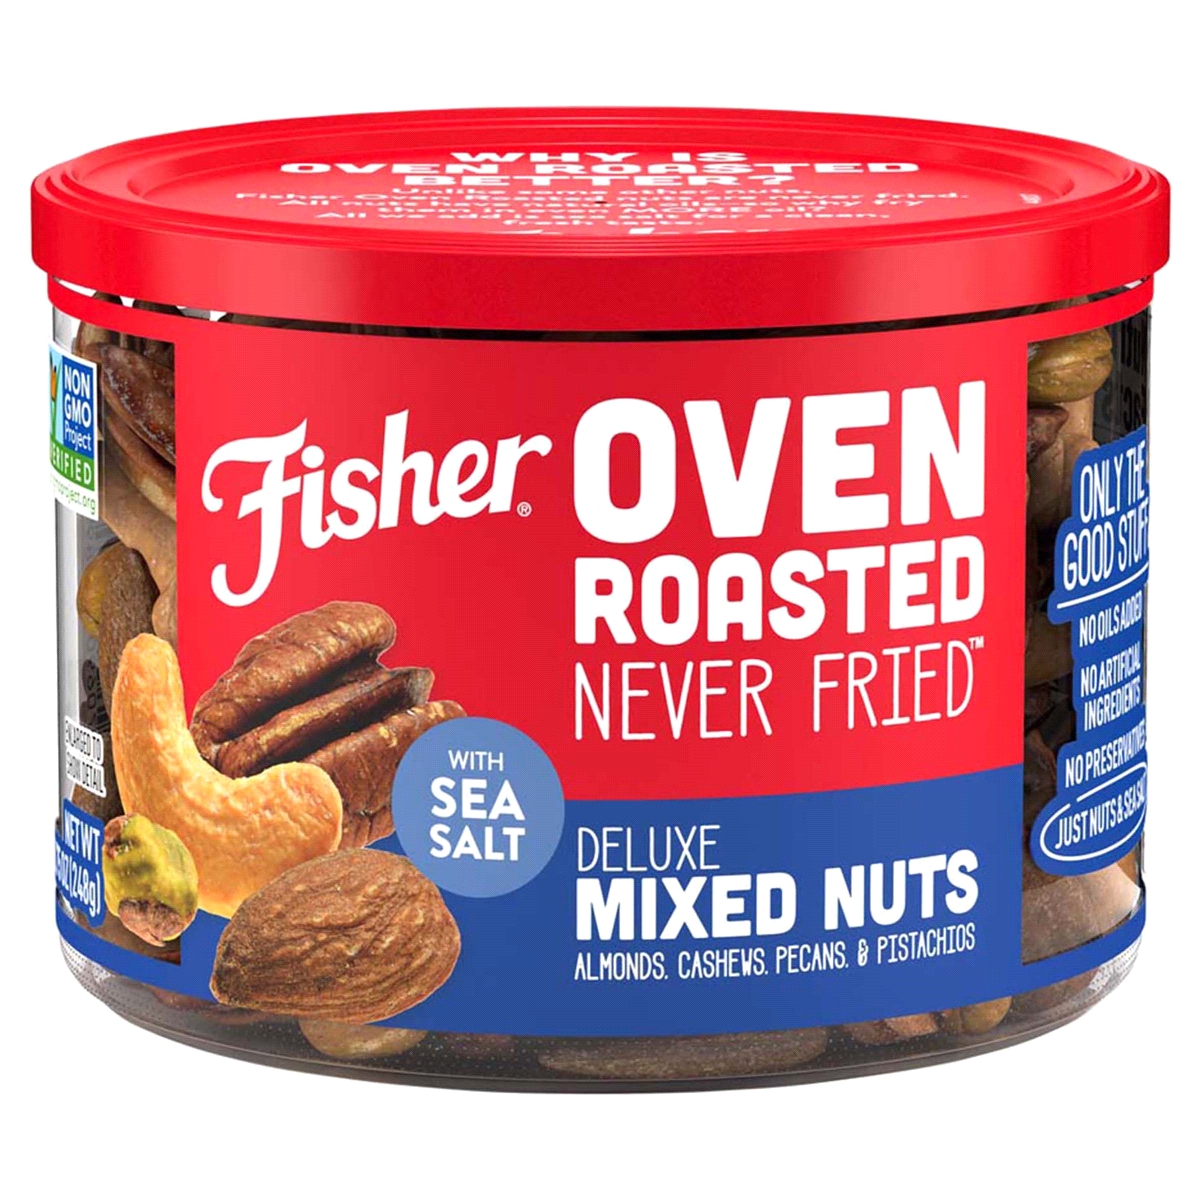 slide 1 of 7, Fisher Oven Roasted Never Fried Deluxe Mixed Nuts With Sea Salt, 8.75 oz